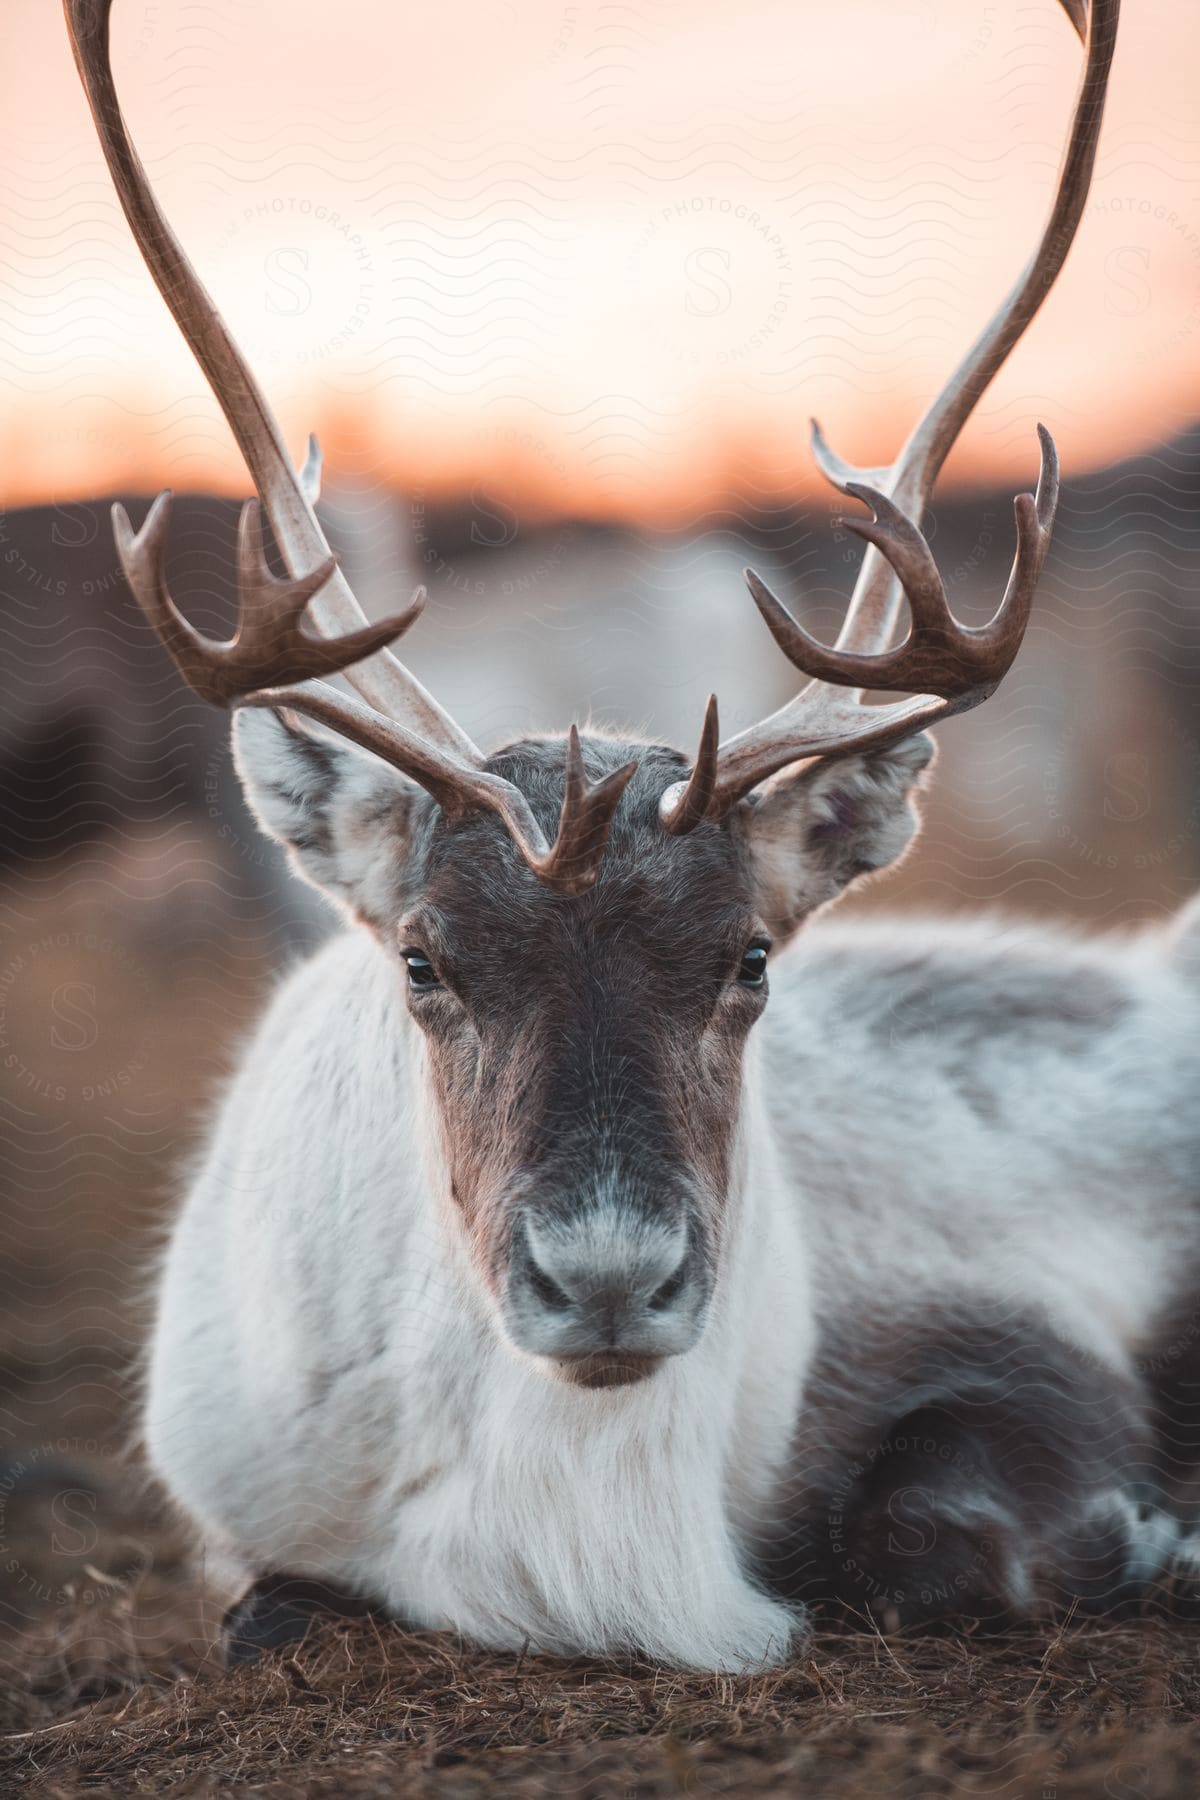 A reindeer rests on the brown ground and gazes directly at the camera